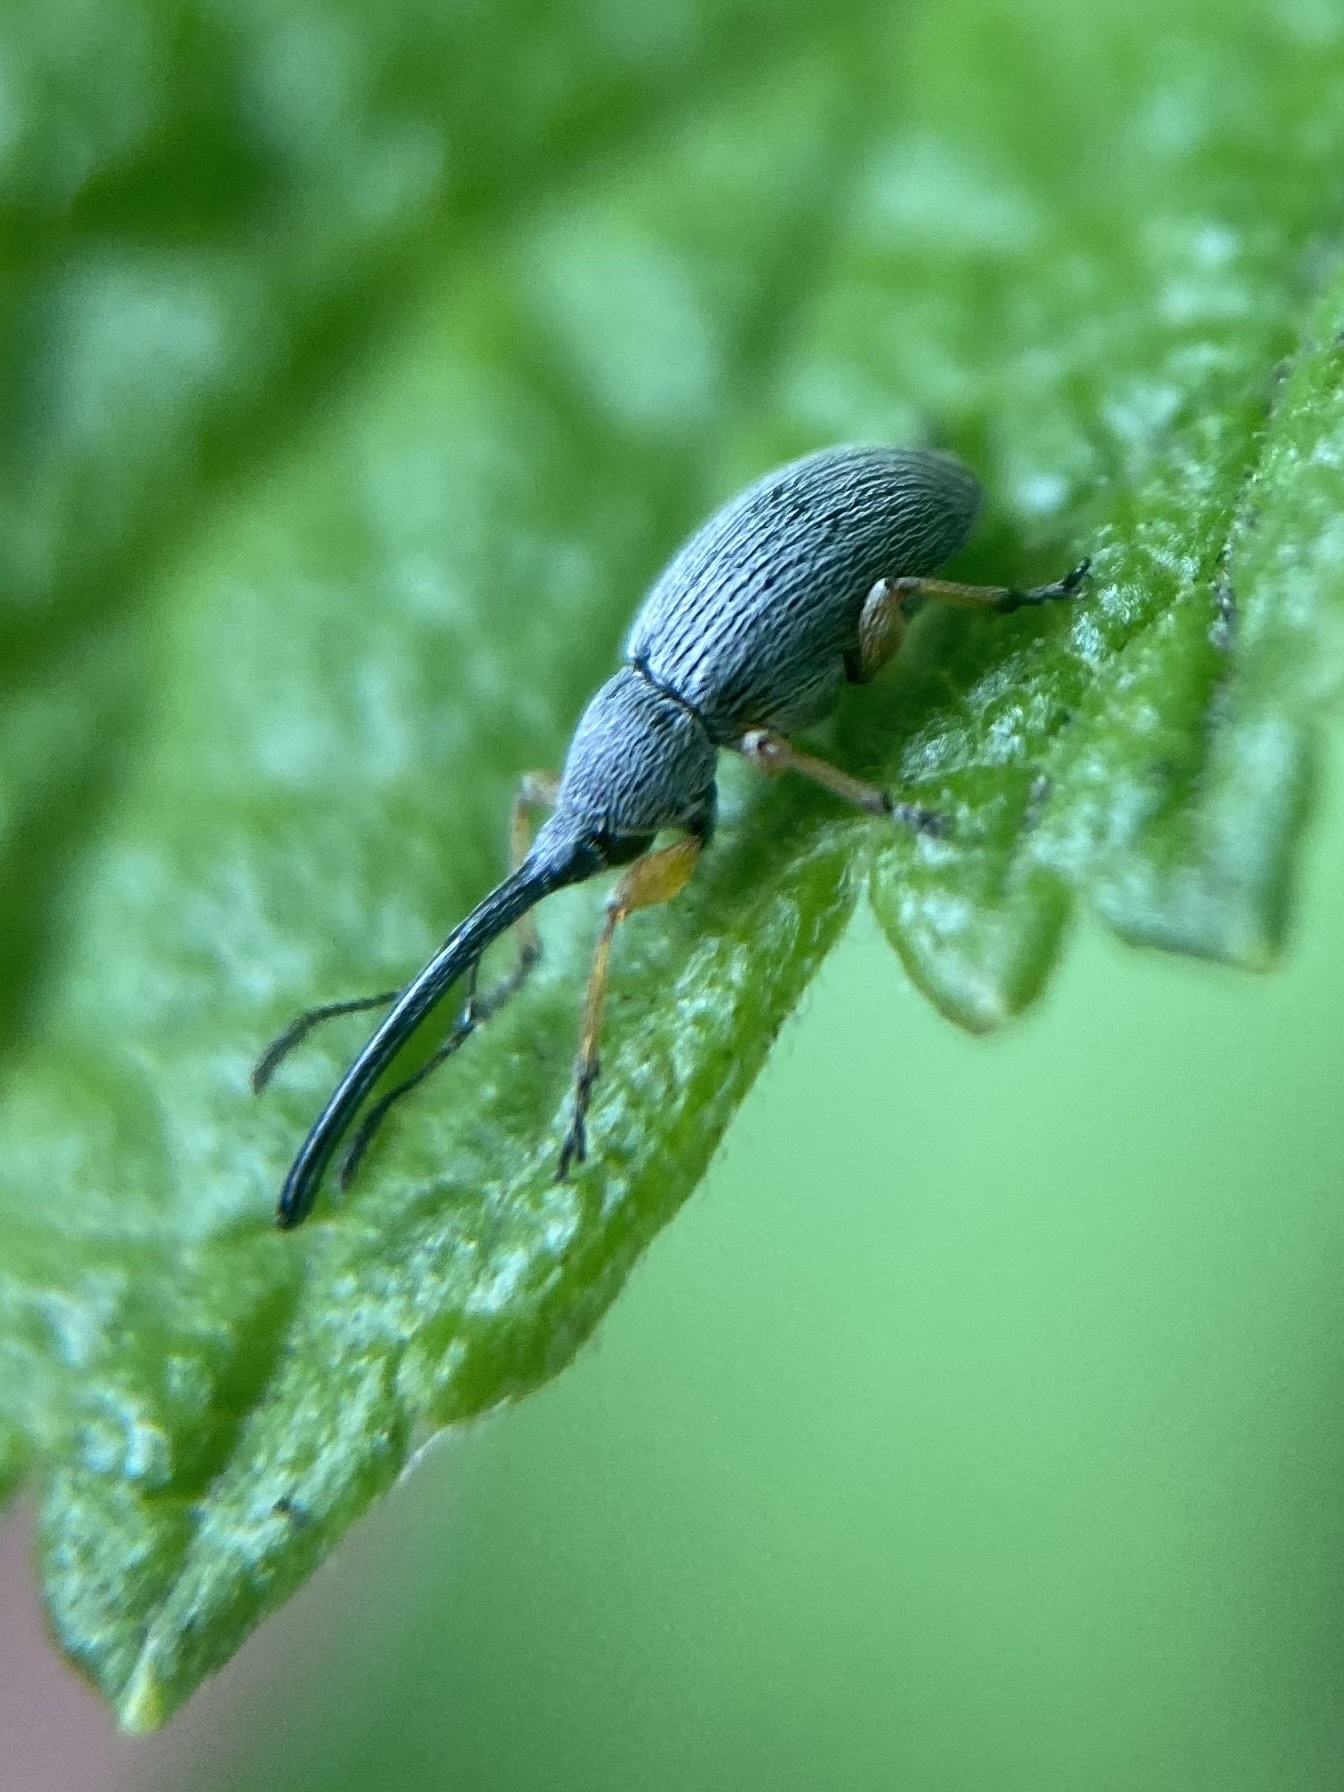 Stock photo of Hollyhock weevil (Apion longirostre) a fairly new arrival in  the UK but…. Available for sale on